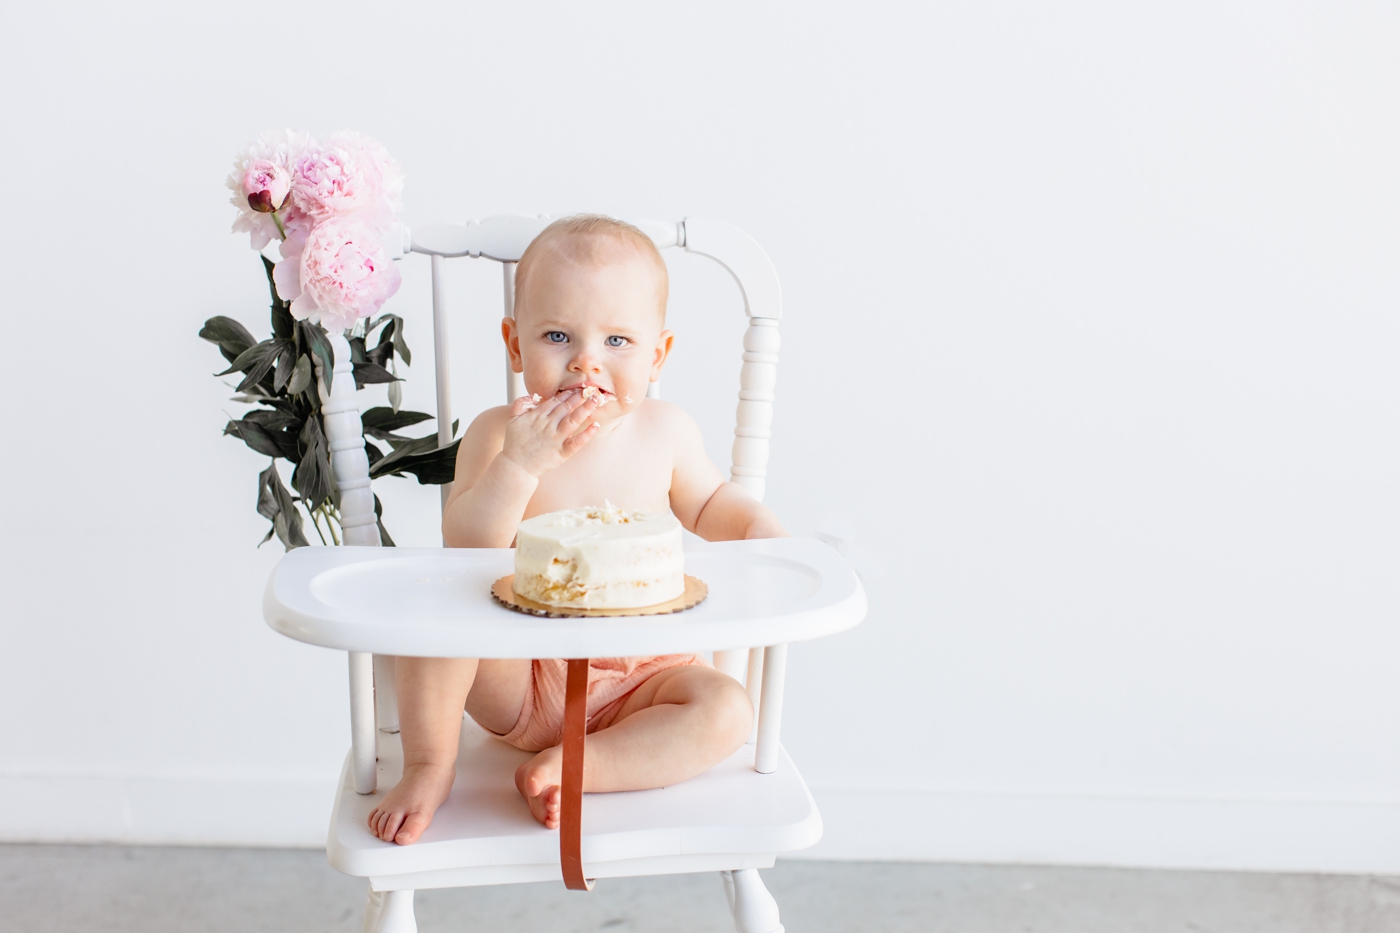 Little girl tasting frosting during her cake smash in studio by Sana Ahmed Photography.